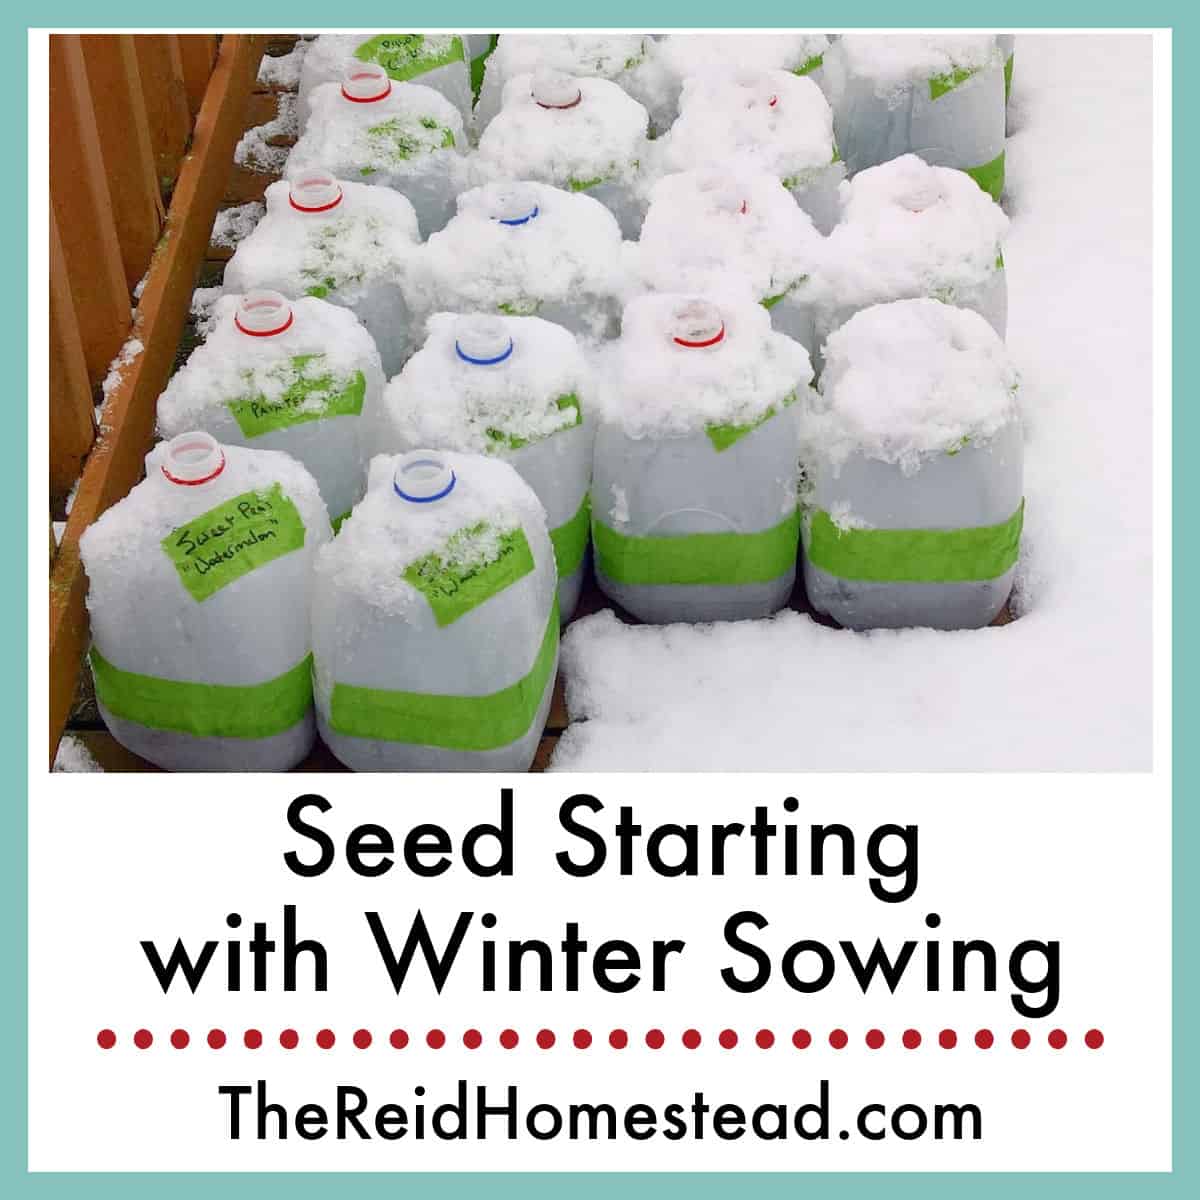 photo of milk jugs in the snow that have been winter sown with text overlay Seed Starting with Winter Sowing